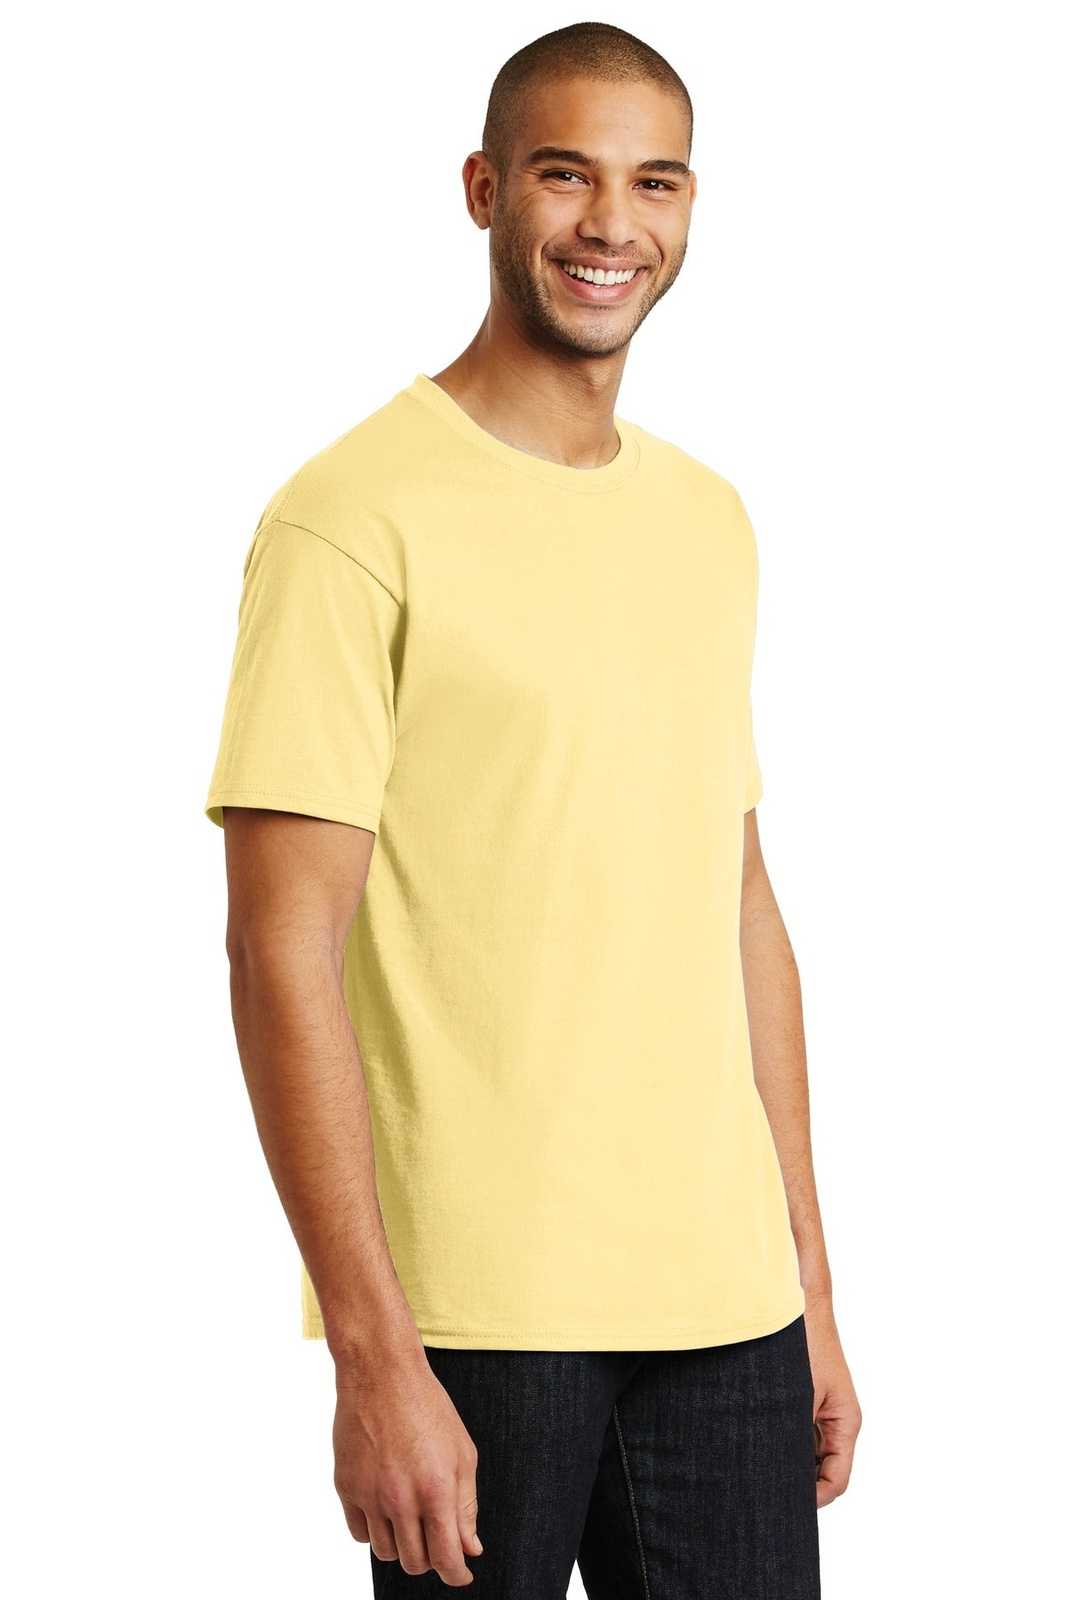 Hanes 5250 Tagless 100% Cotton T-Shirt - Daffodil Yellow - HIT a Double